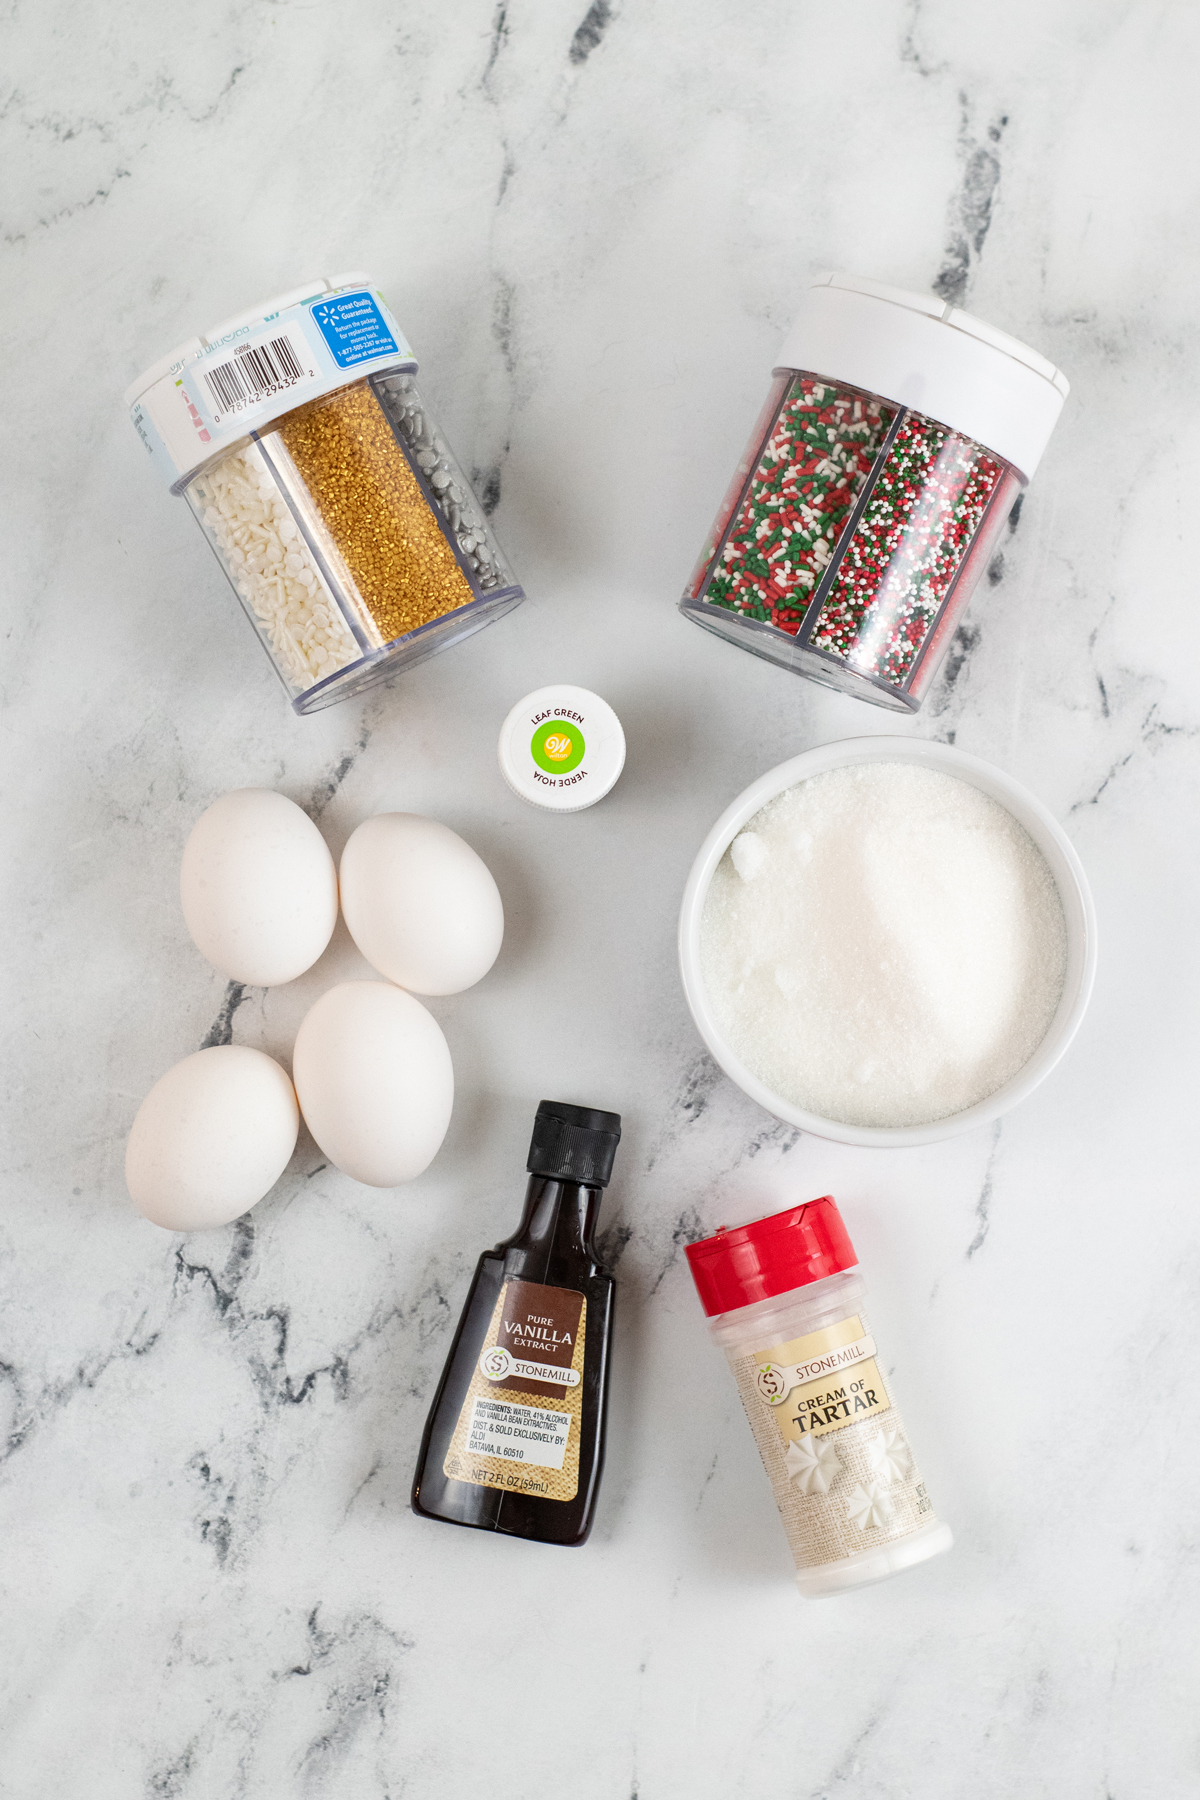 Ingredients for Christmas Tree Meringues on a white counter. This includes eggs, white sugar, vanilla extract, cream of tartar, green gel food coloring, star shaped sprinkles, and sprinkles.